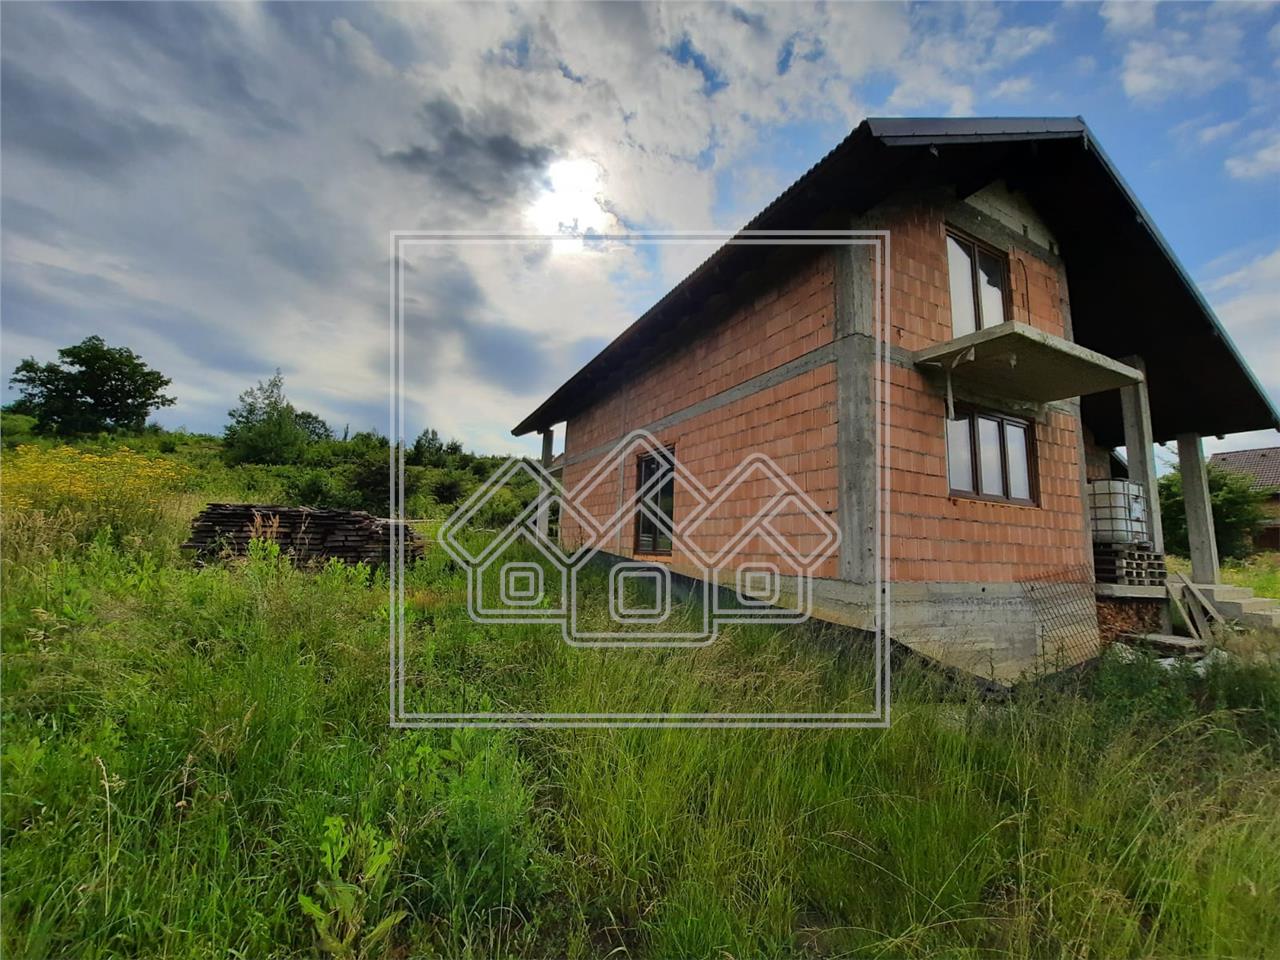 House for sale in Sibiu - detached - 5 rooms, cellar, garage